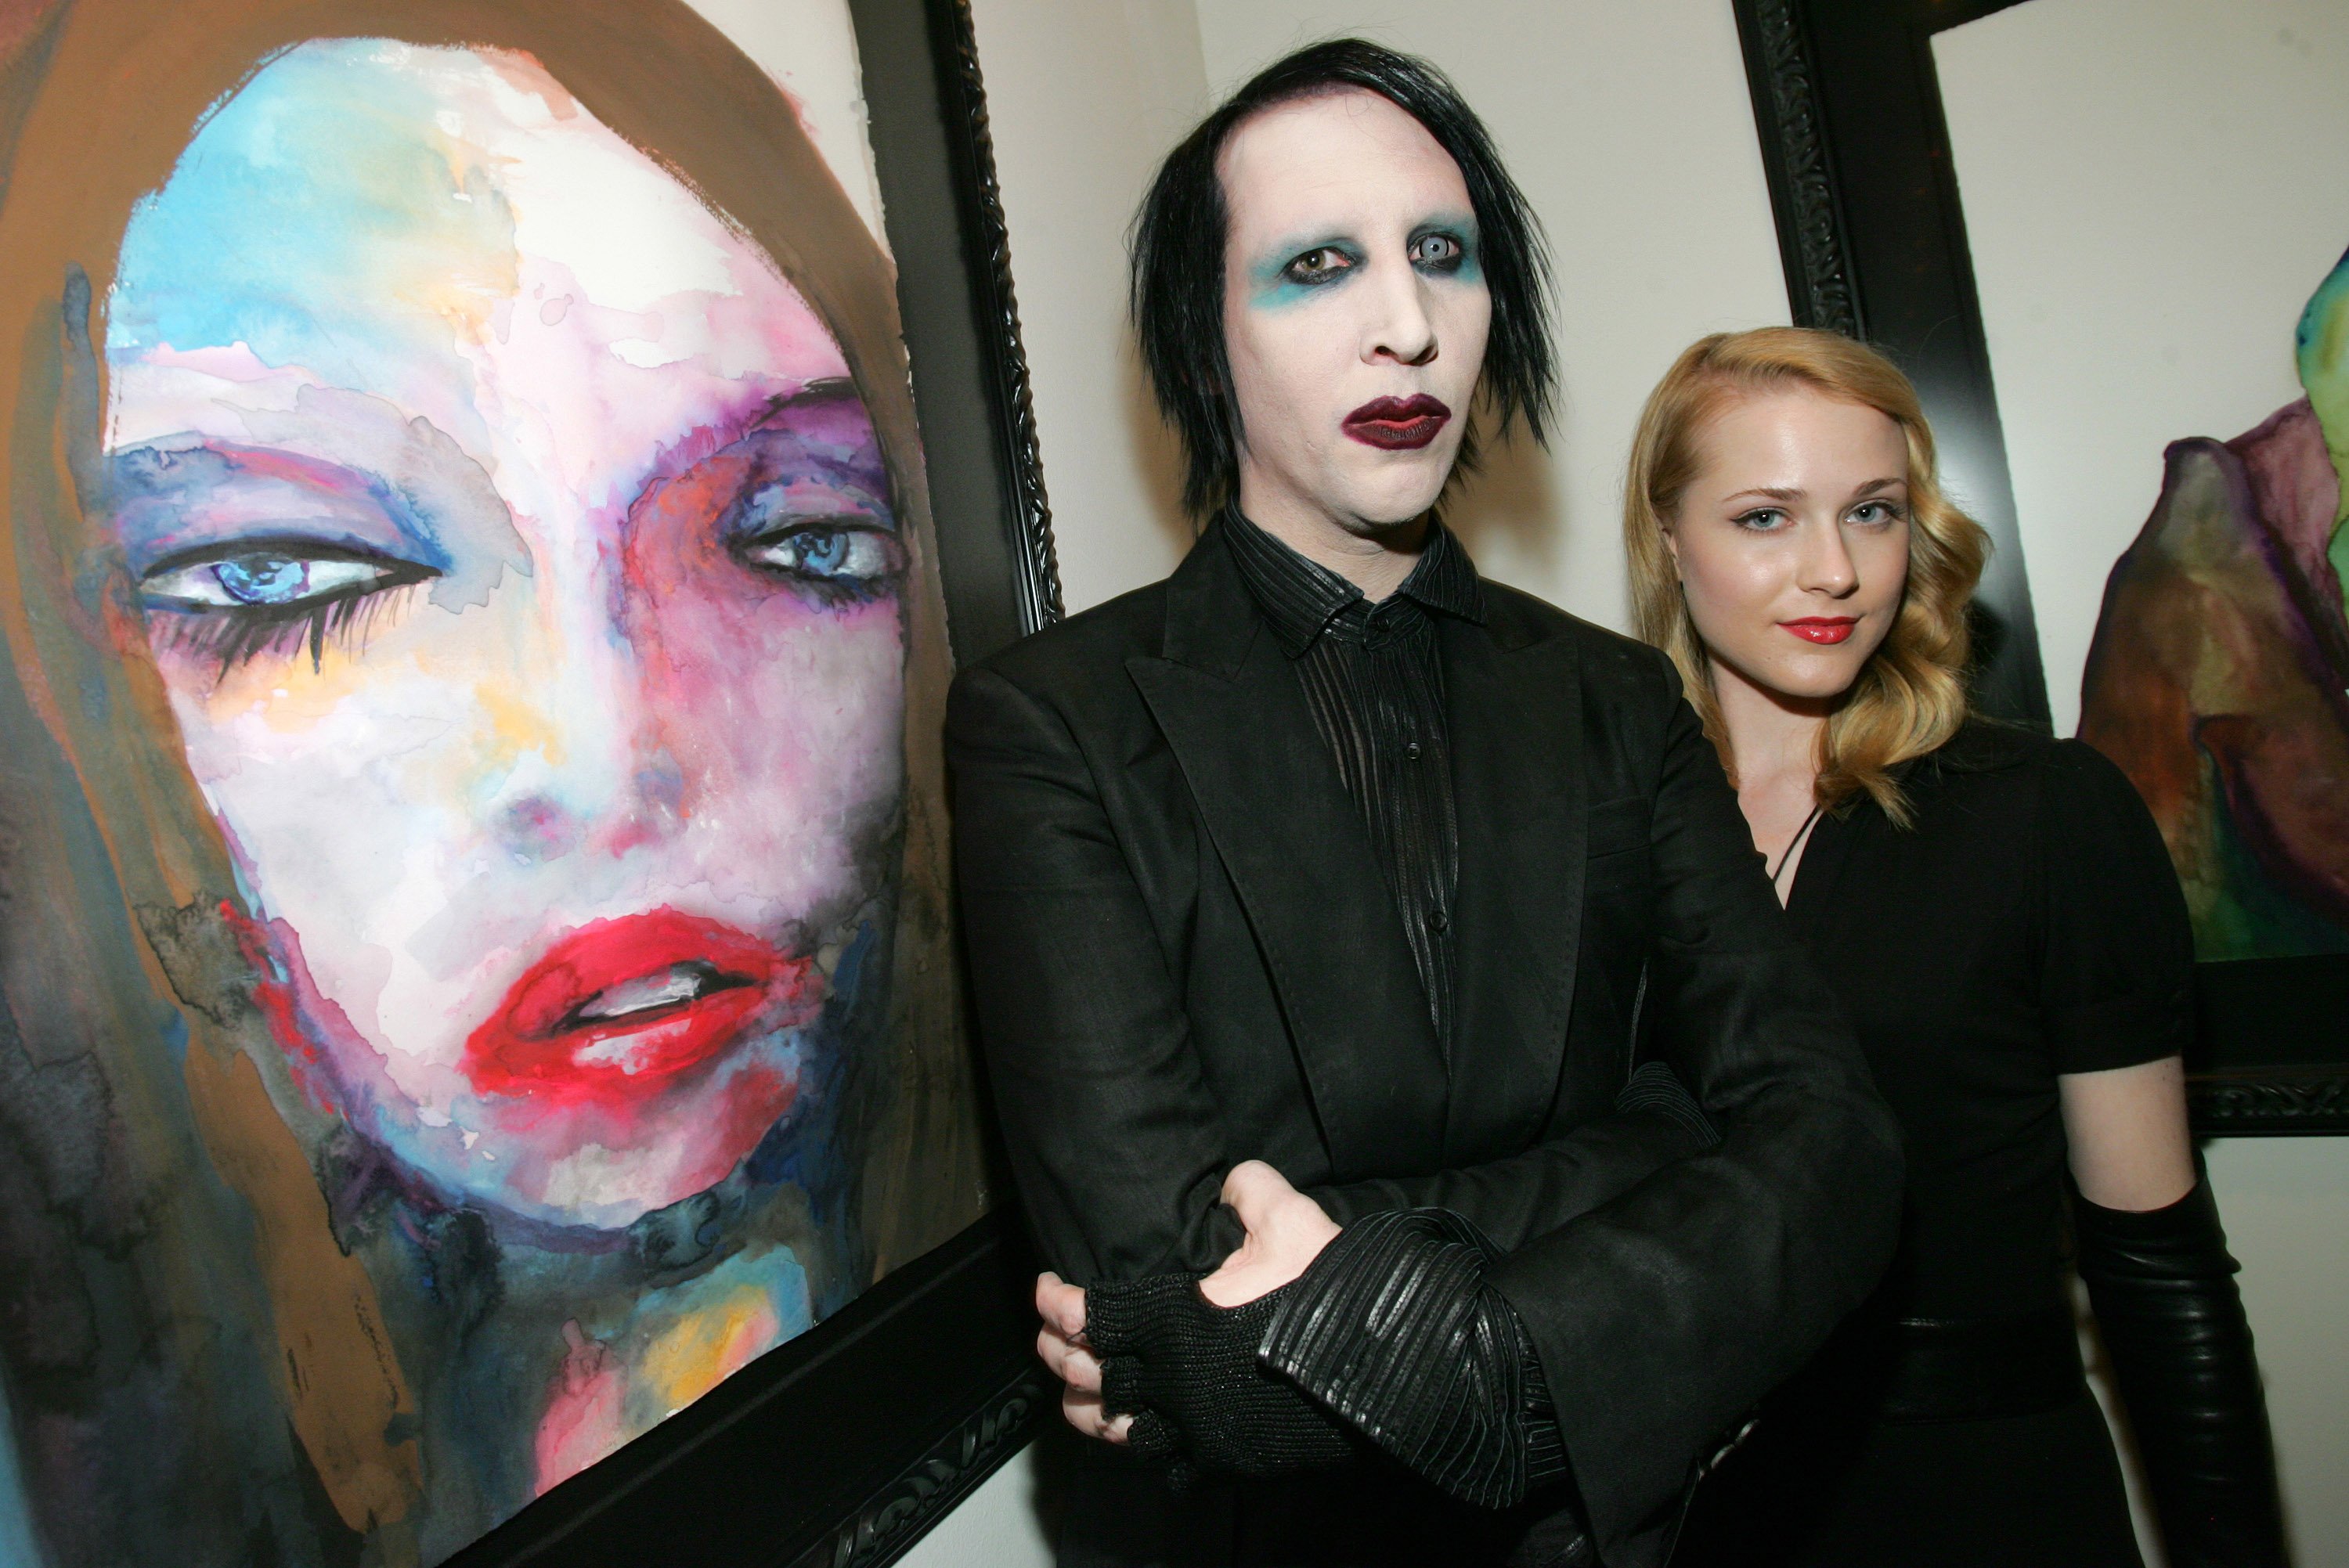 Marilyn Manson and Evan Rachel Wood next to a painting